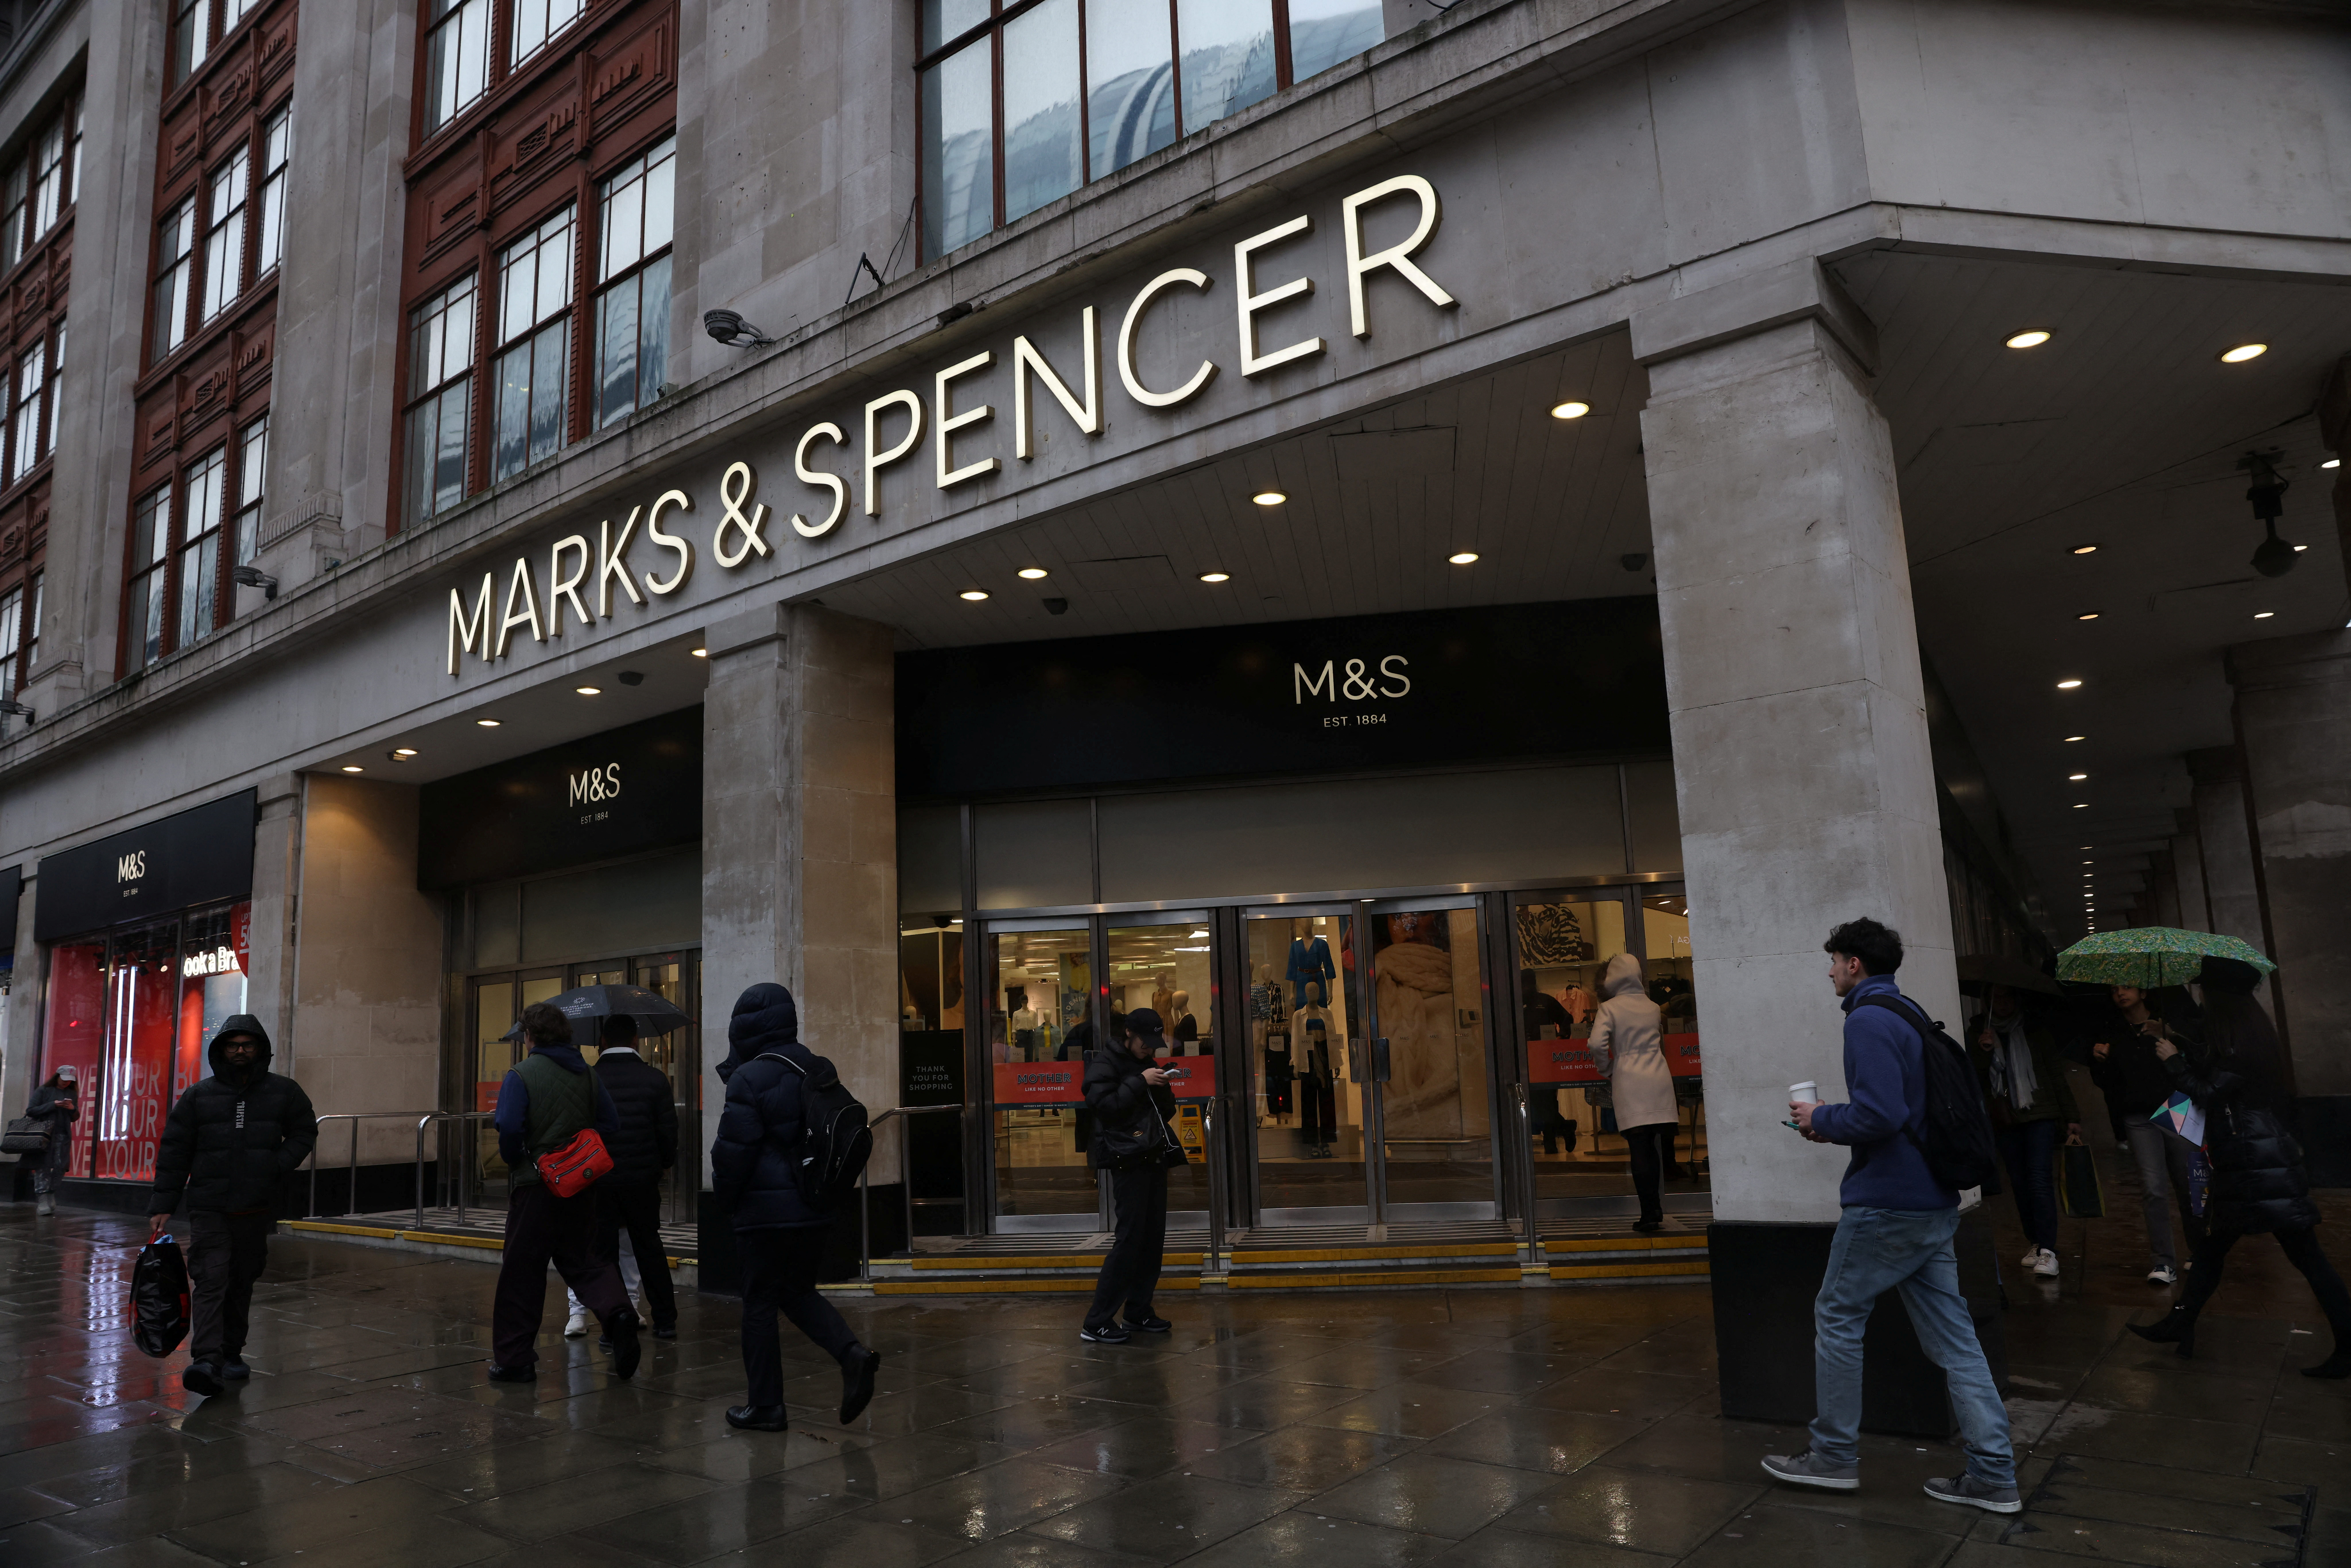 Martin Lewis' team have revealed how you can get a beauty deal at M&S